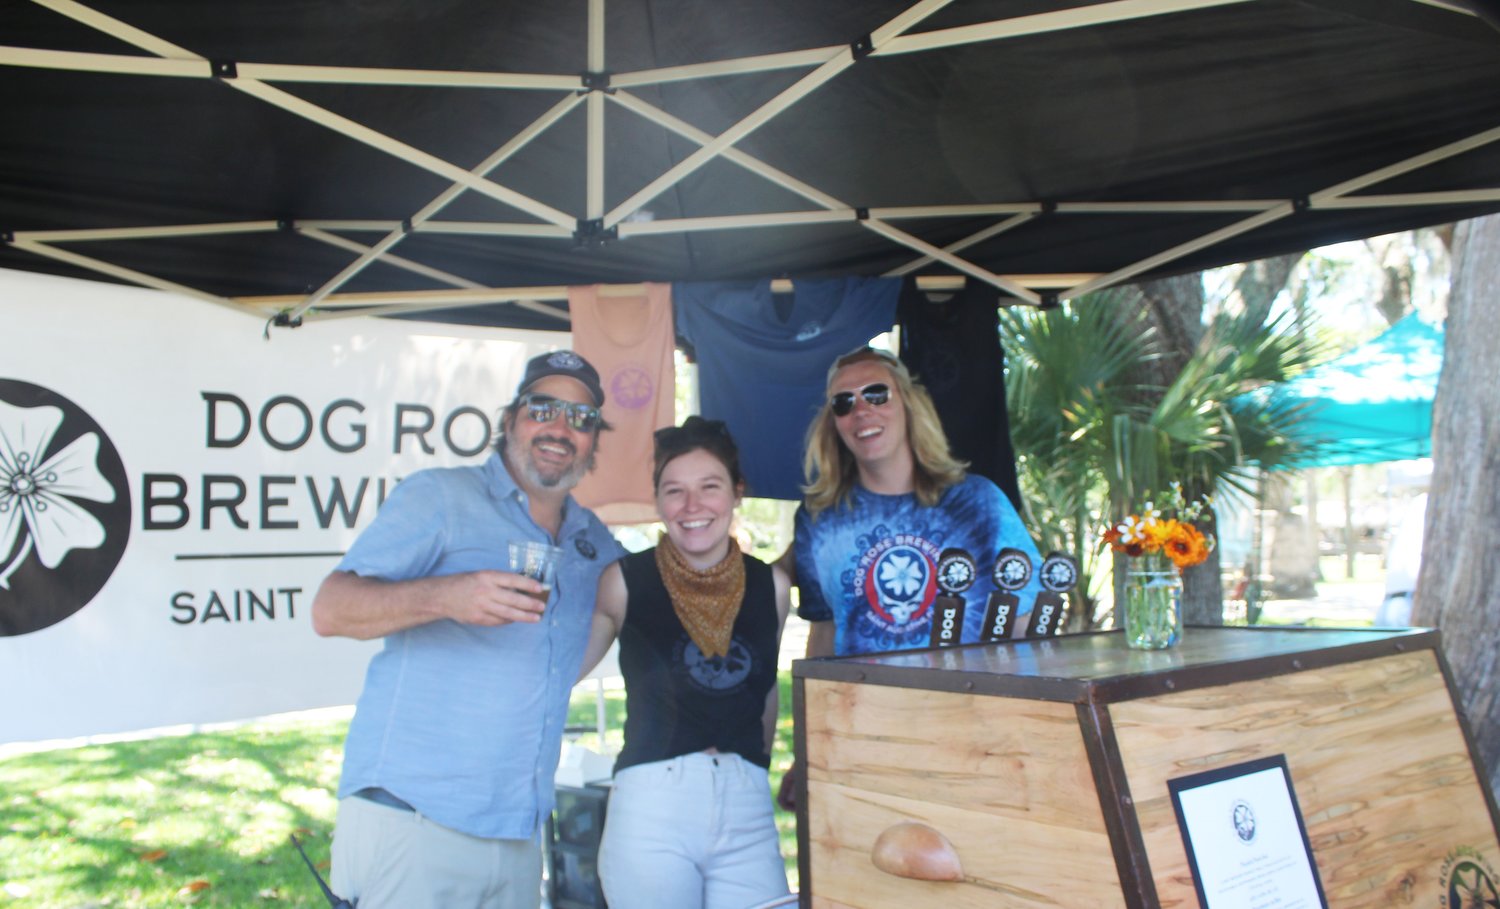 The Dog Rose Brewing Co. will participate once again this year in the St. Augustine Brewers’ Festival.